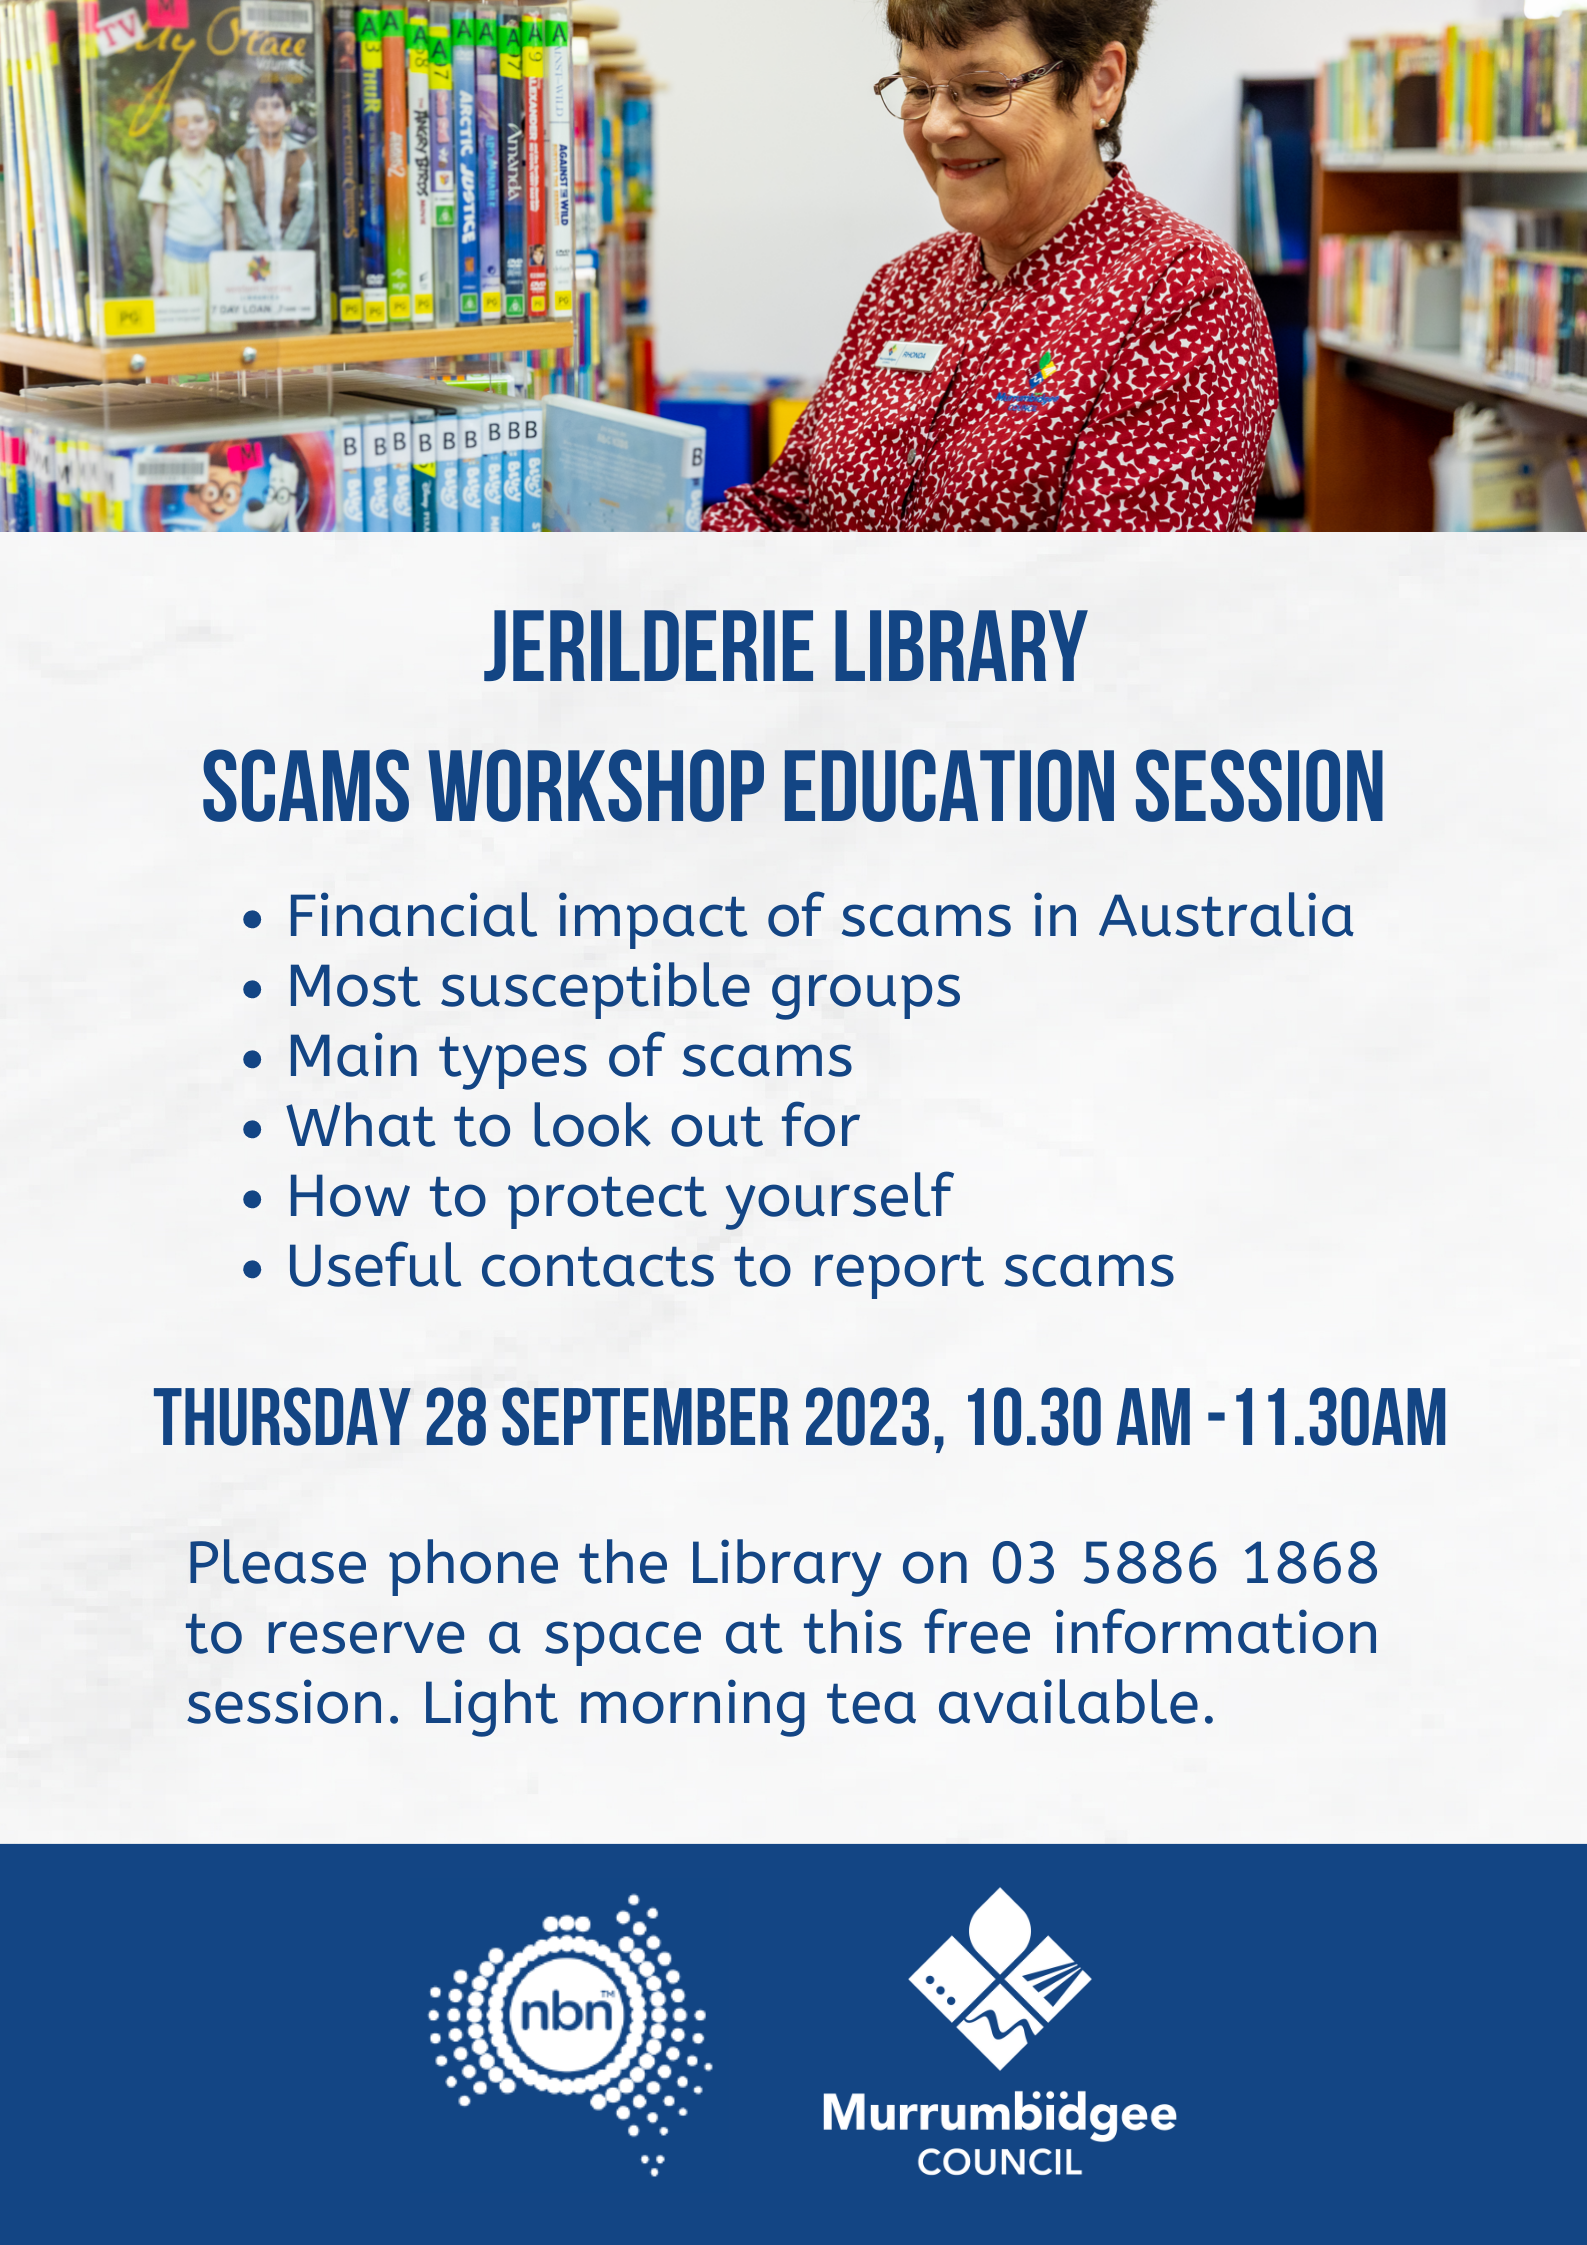 Jerilderie Library scams workshop education session